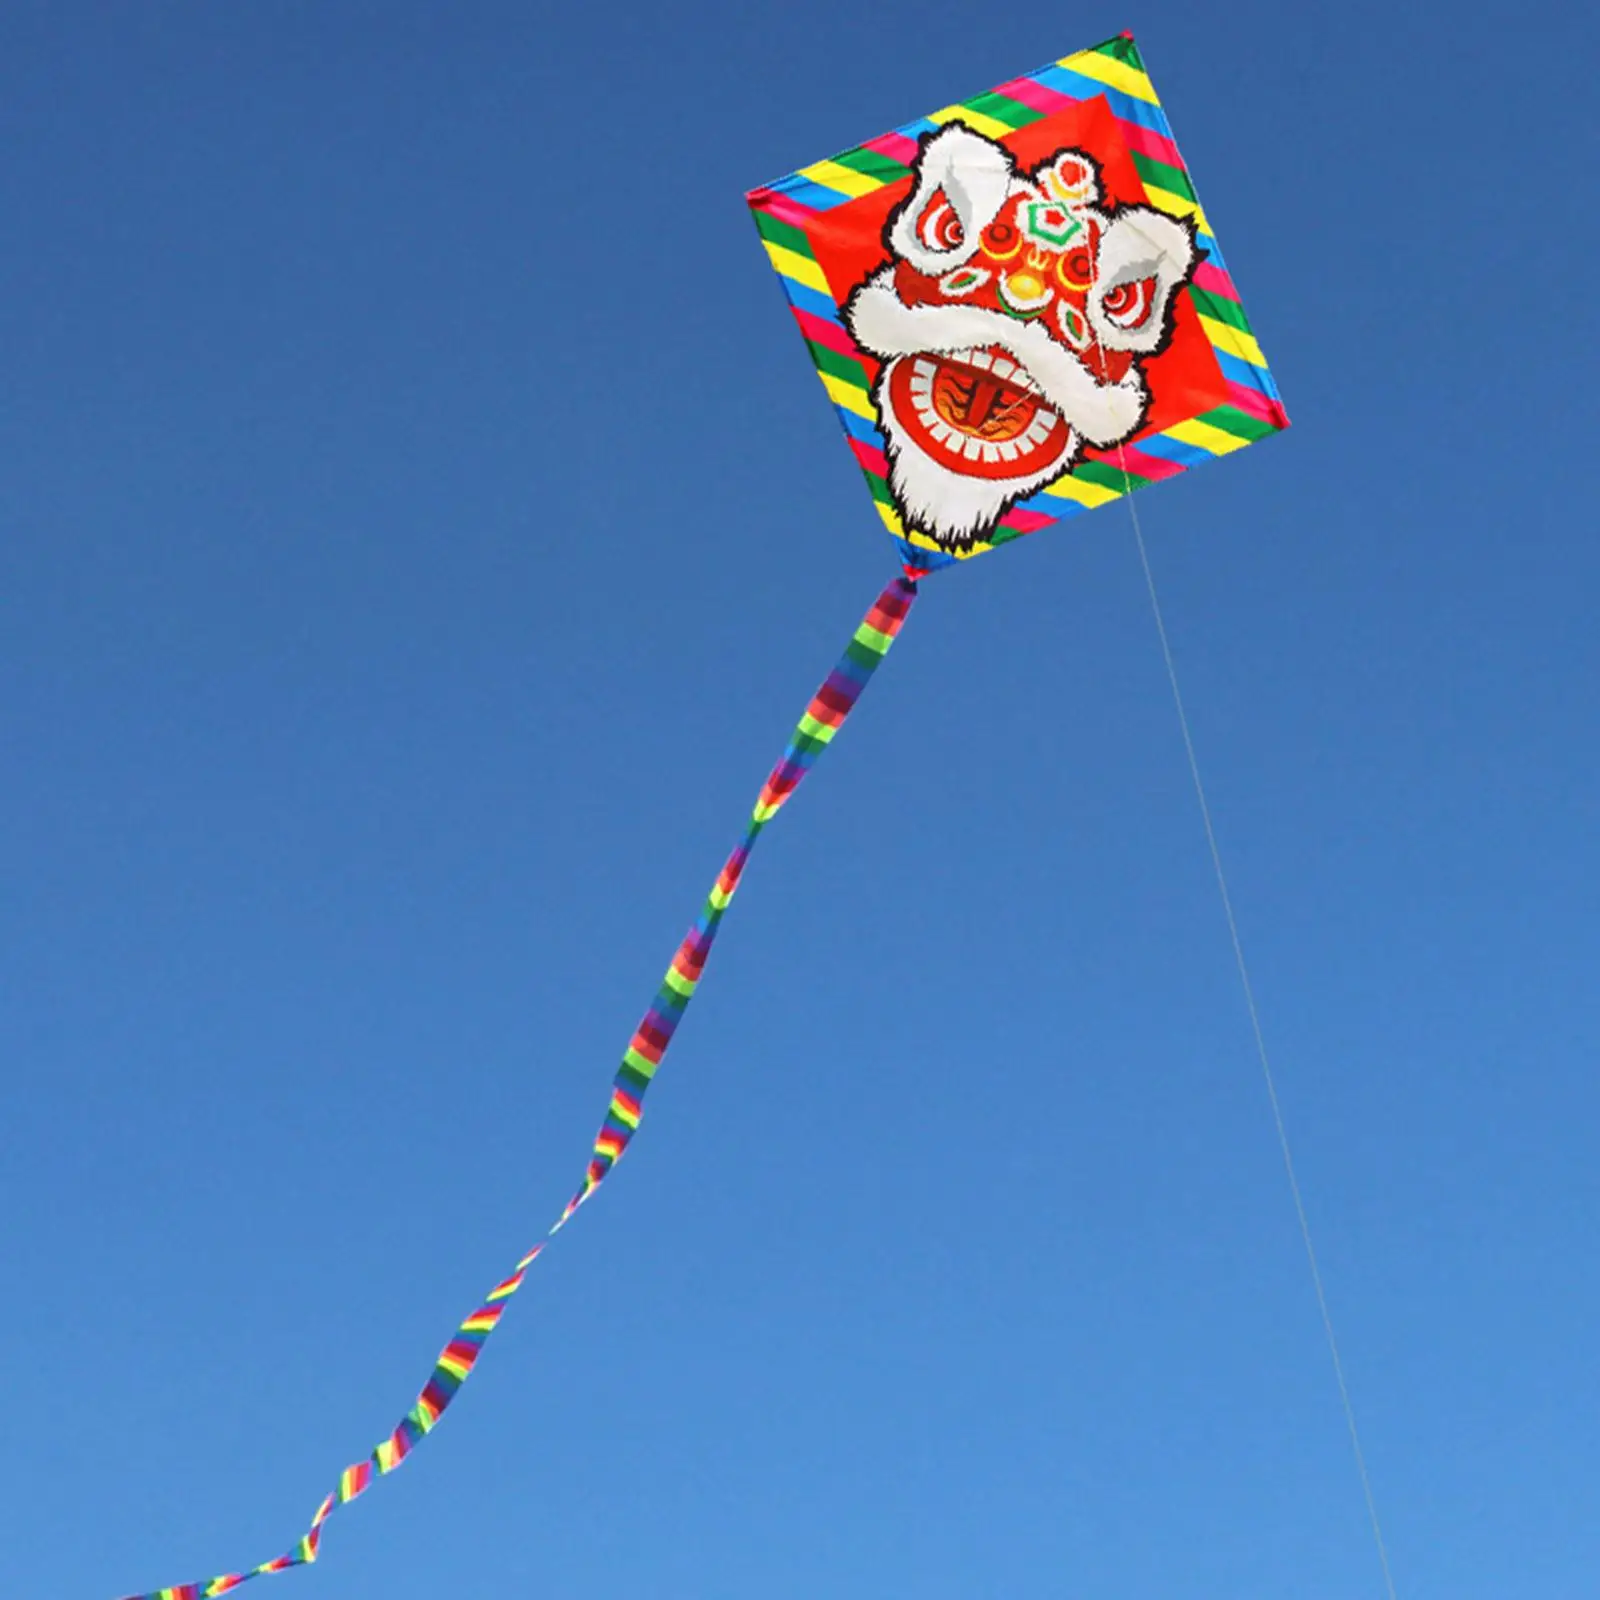 Huge Kite Easy to Fly Long Tail 10M Flying Fun for Kids Kids Toy Open Field